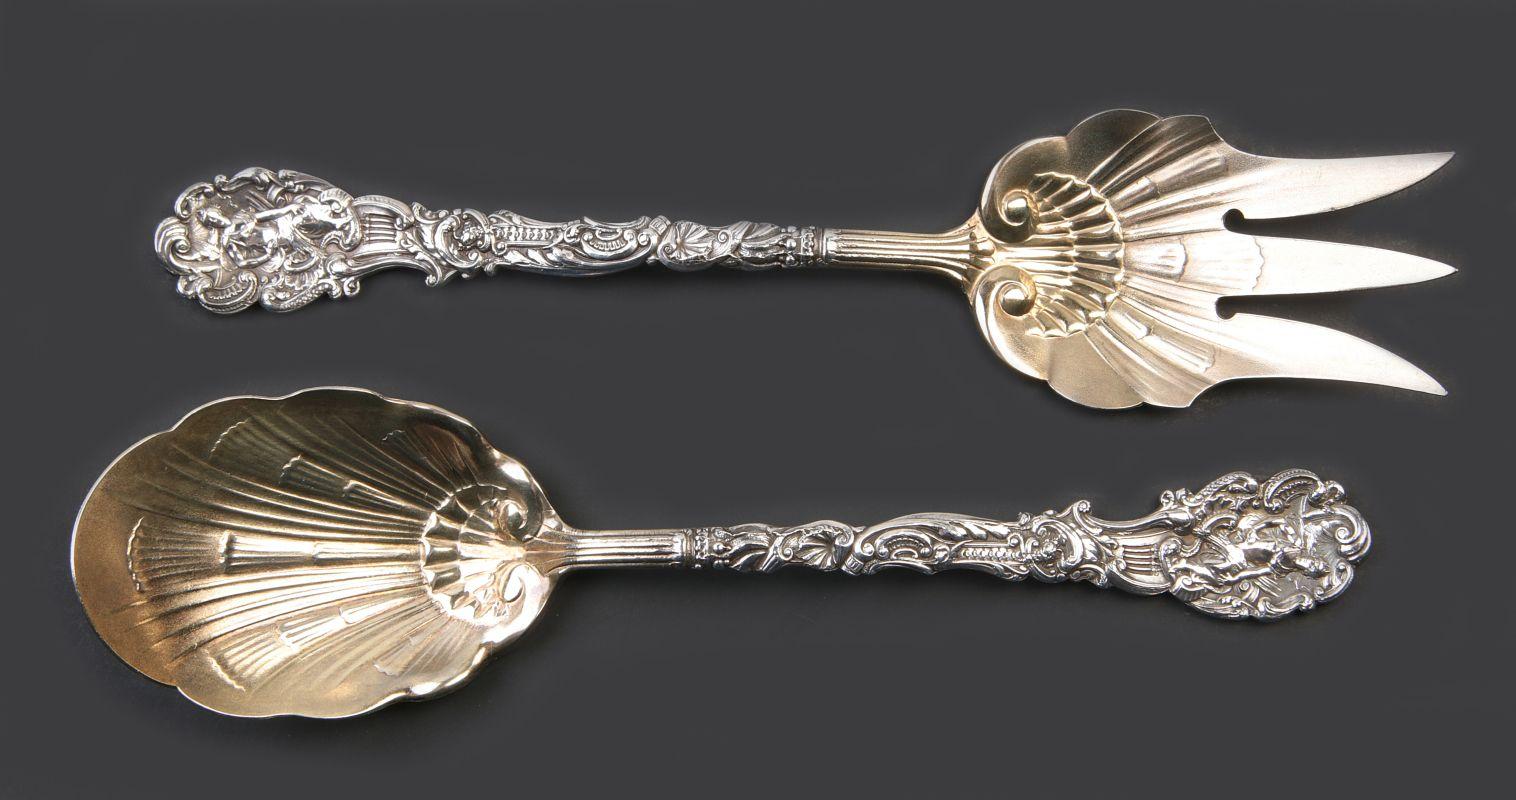 AN EARLY GORHAM 'VERSAILLES' TWO-PIECE SALAD SET